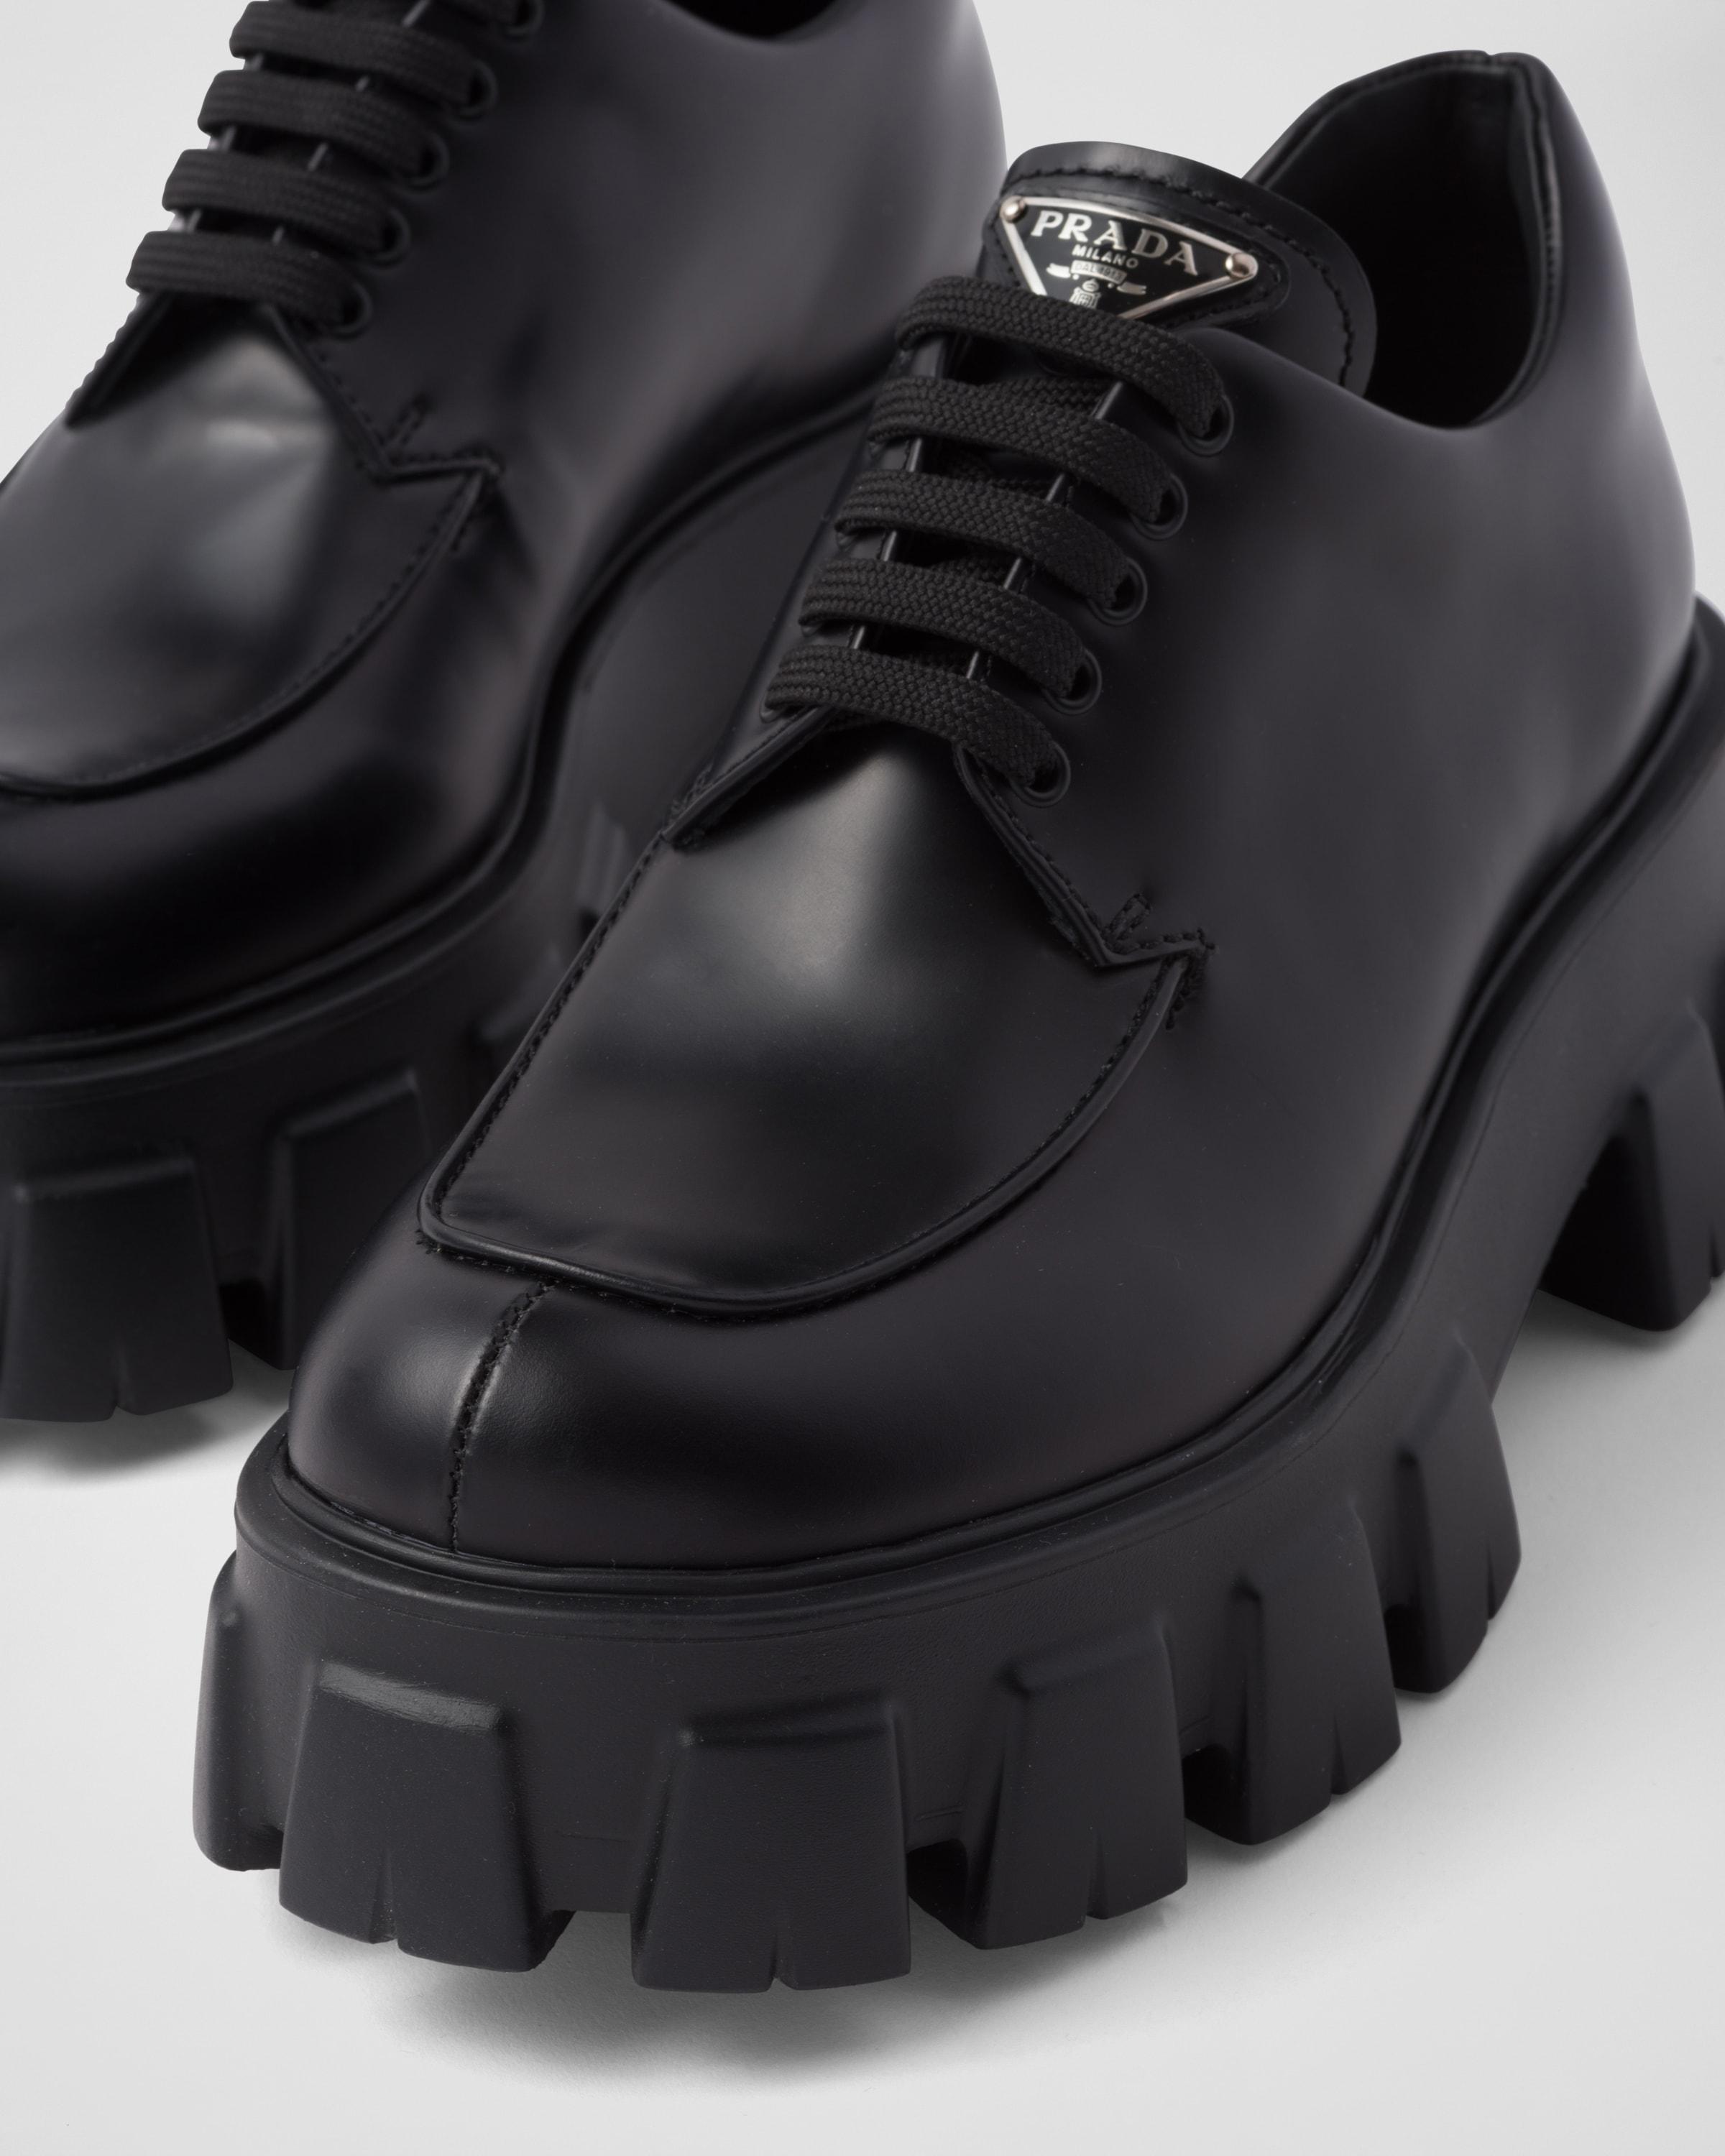 Prada Monolith Brushed Leather Lace-up Shoes in Black | Lyst